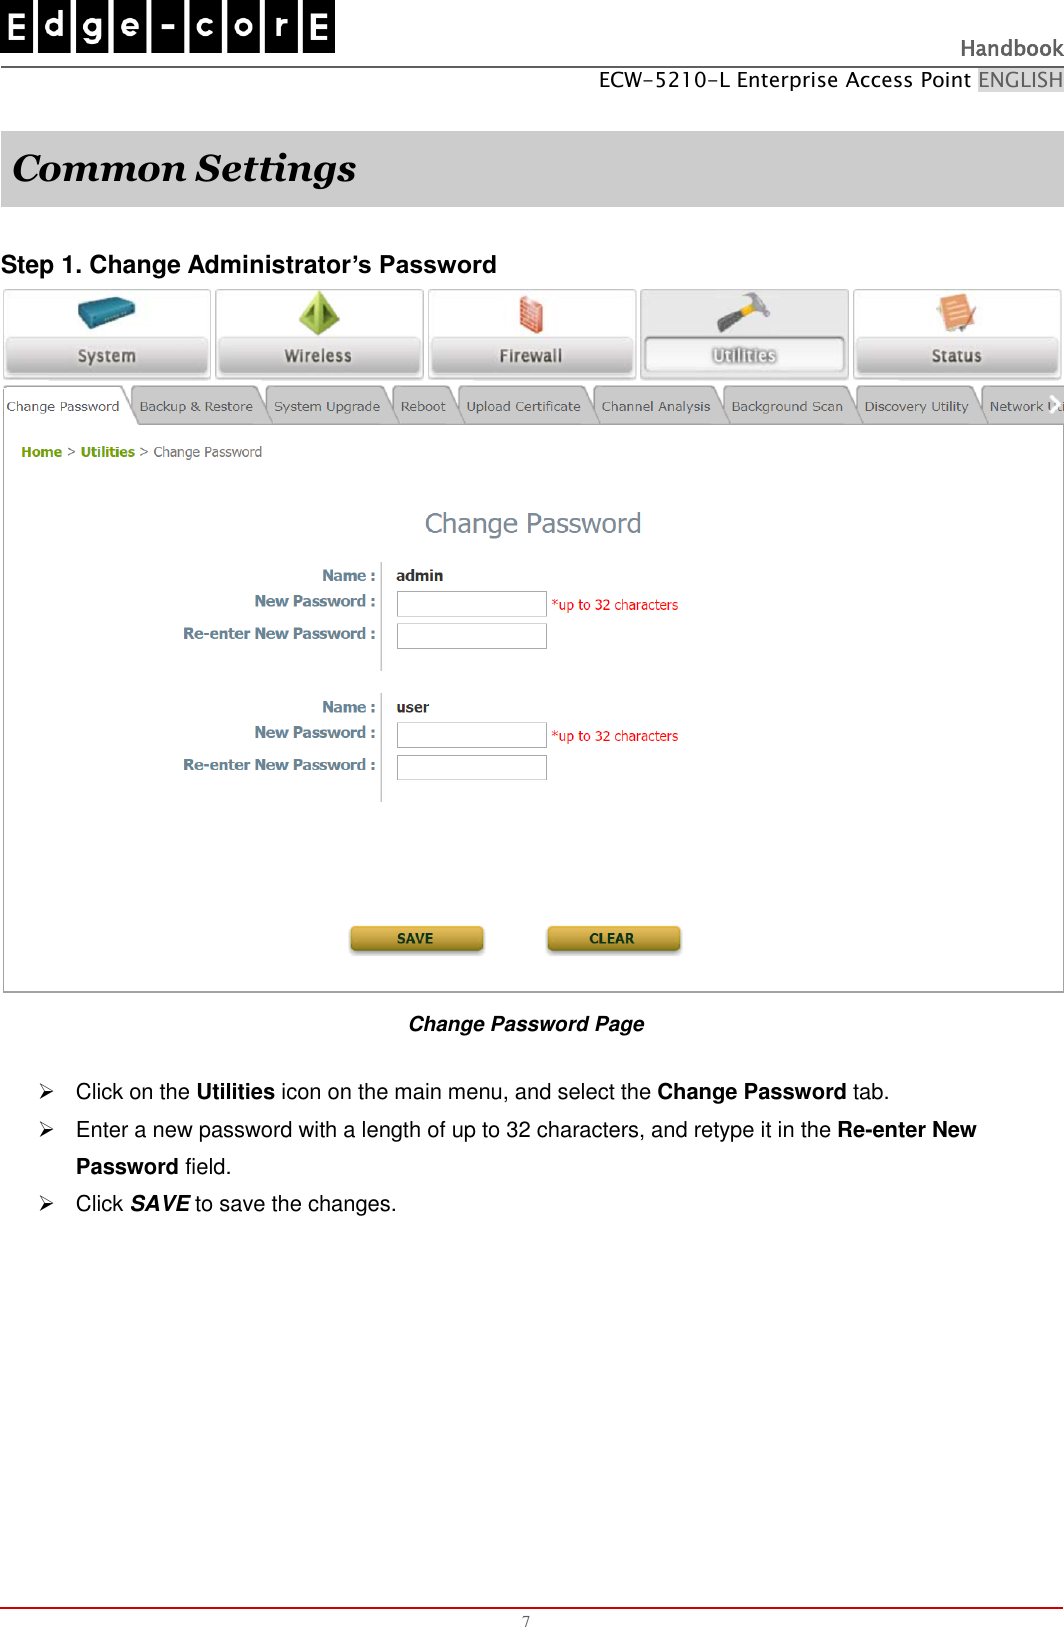   Handbook ECW-5210-L Enterprise Access Point ENGLISH  7  Common Settings  Step 1. Change Administrator’s Password  Change Password Page   Click on the Utilities icon on the main menu, and select the Change Password tab.   Enter a new password with a length of up to 32 characters, and retype it in the Re-enter New Password field.   Click SAVE to save the changes.   